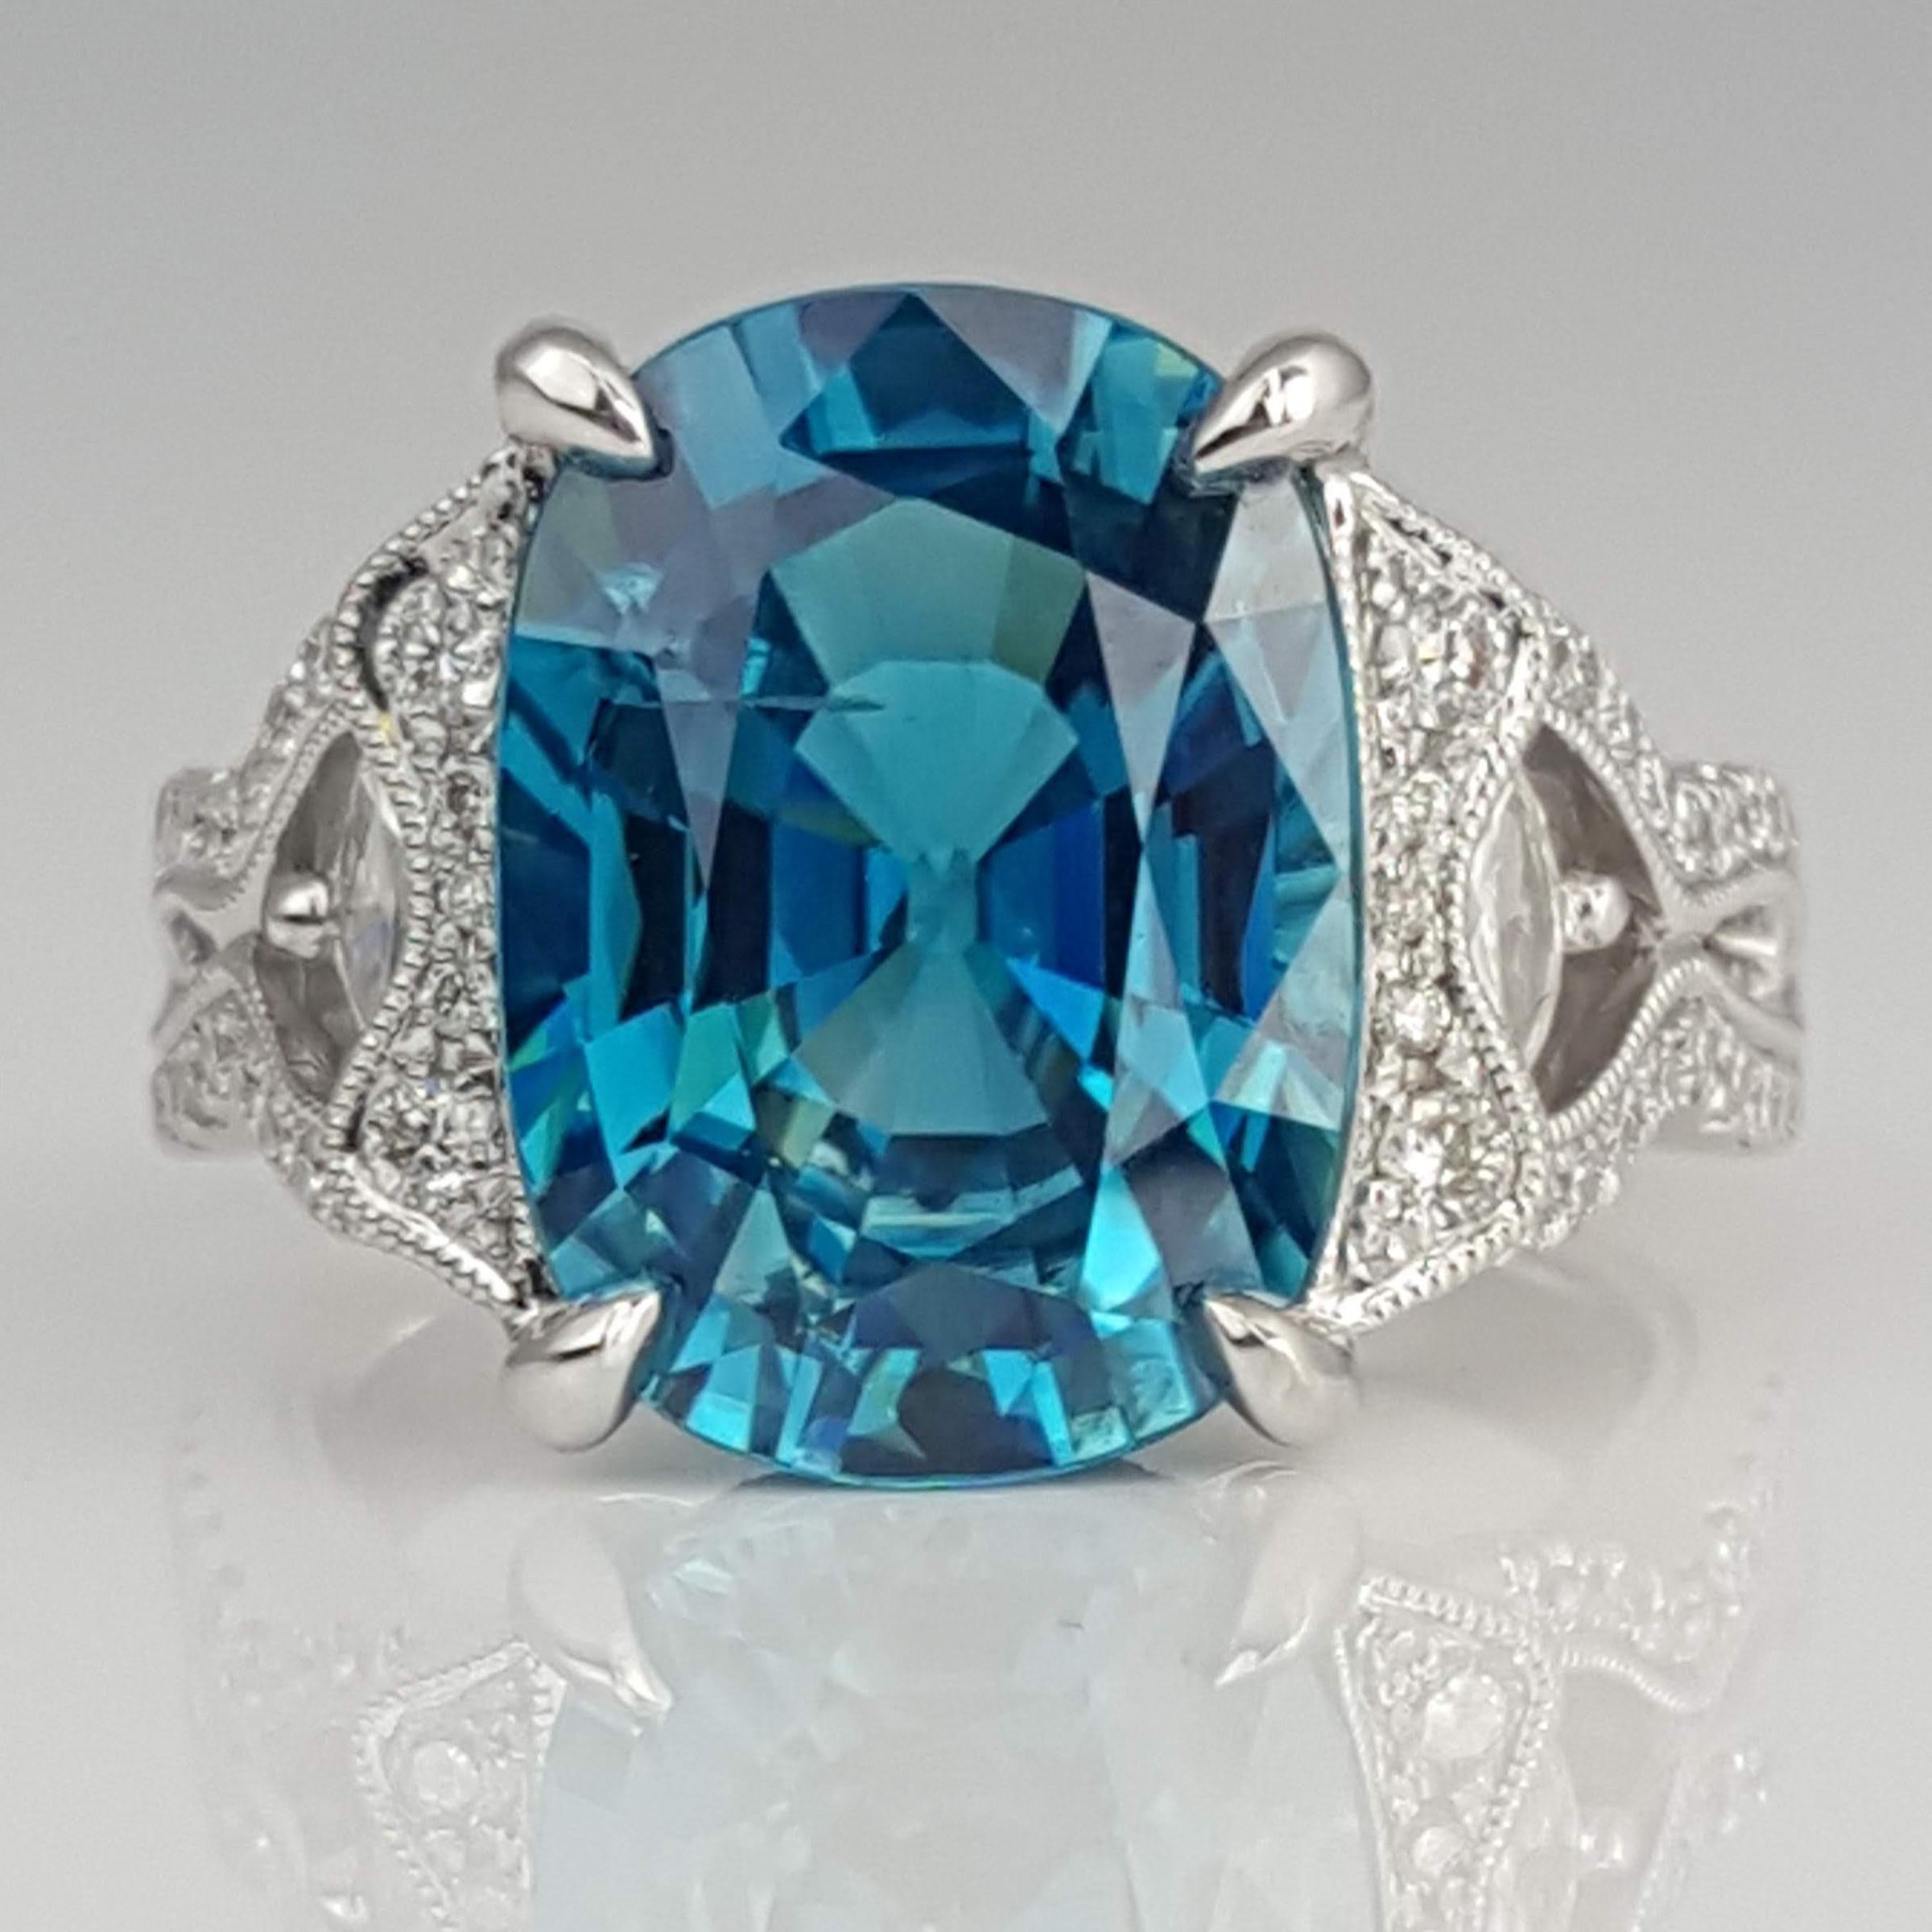 9.98 Ct Oval Cut Blue Zircon and 0.54 Carat Natural Diamond Ring in 18W ref1361 In New Condition For Sale In New York, NY